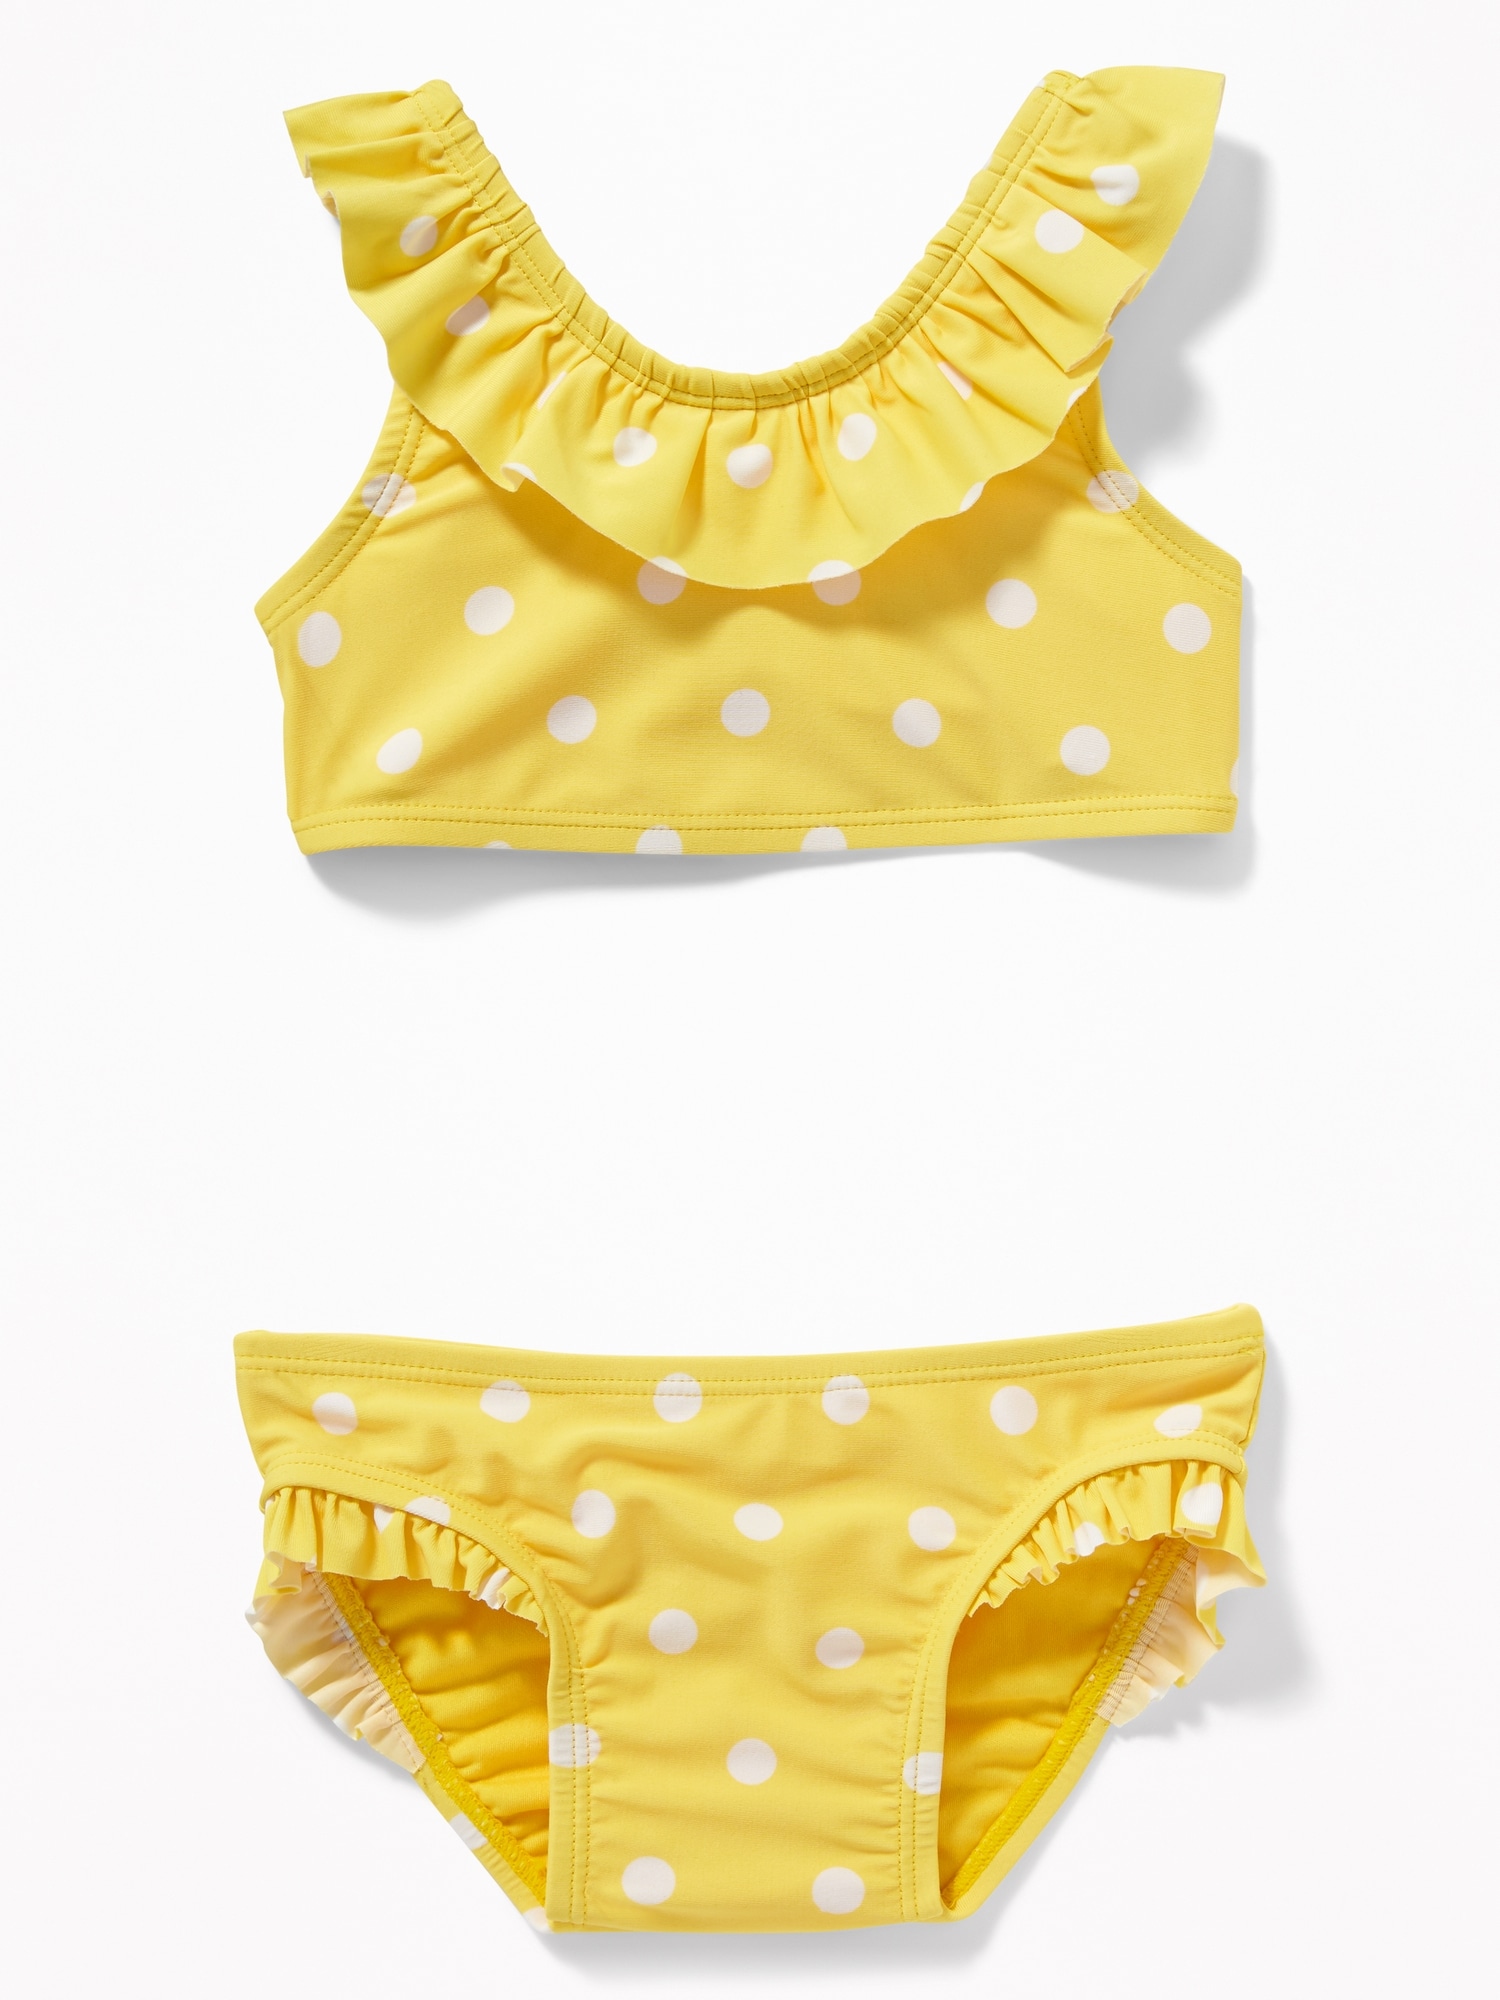 Cute Baby Toddler Kids Swimsuits Under $20